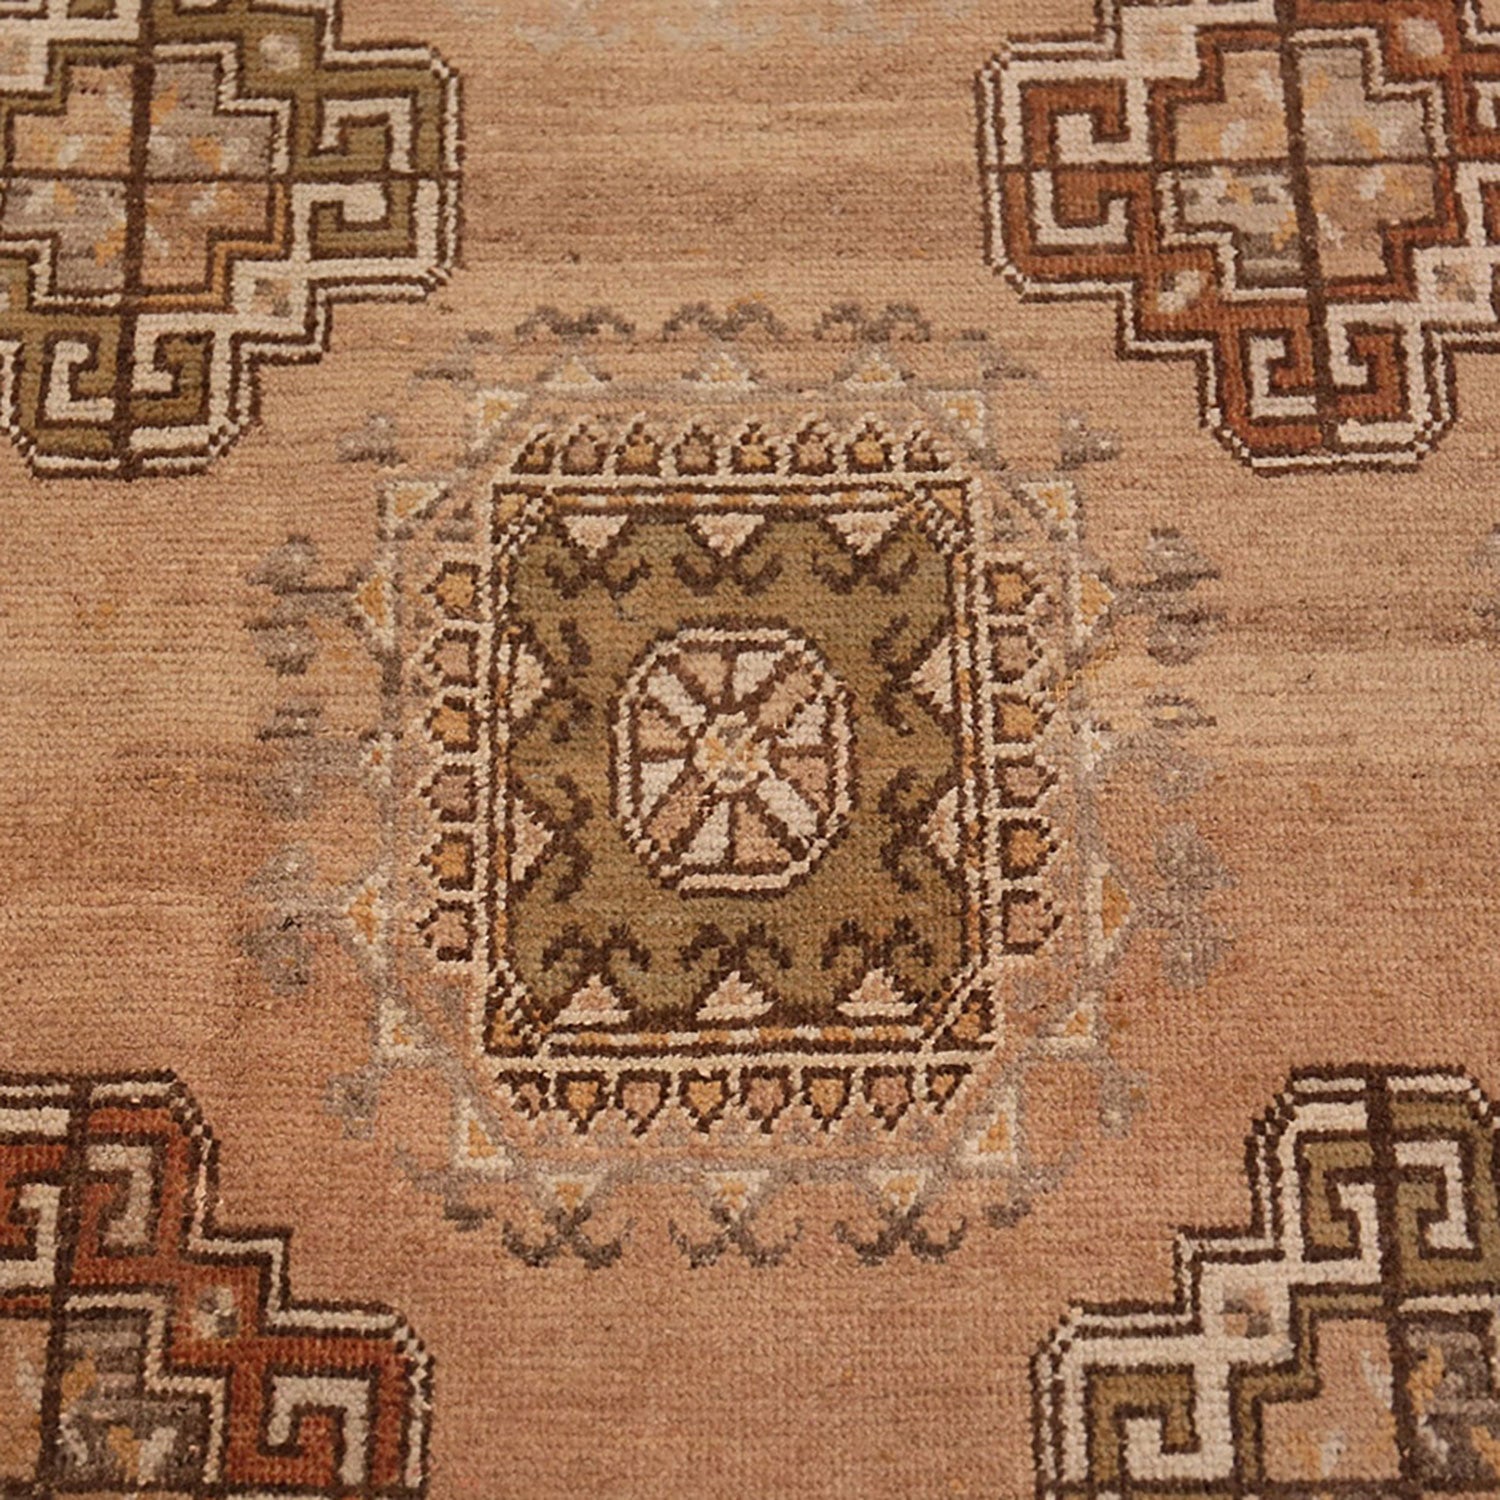 Intricate, symmetrical rug with earthy tones showcases skilled craftsmanship.